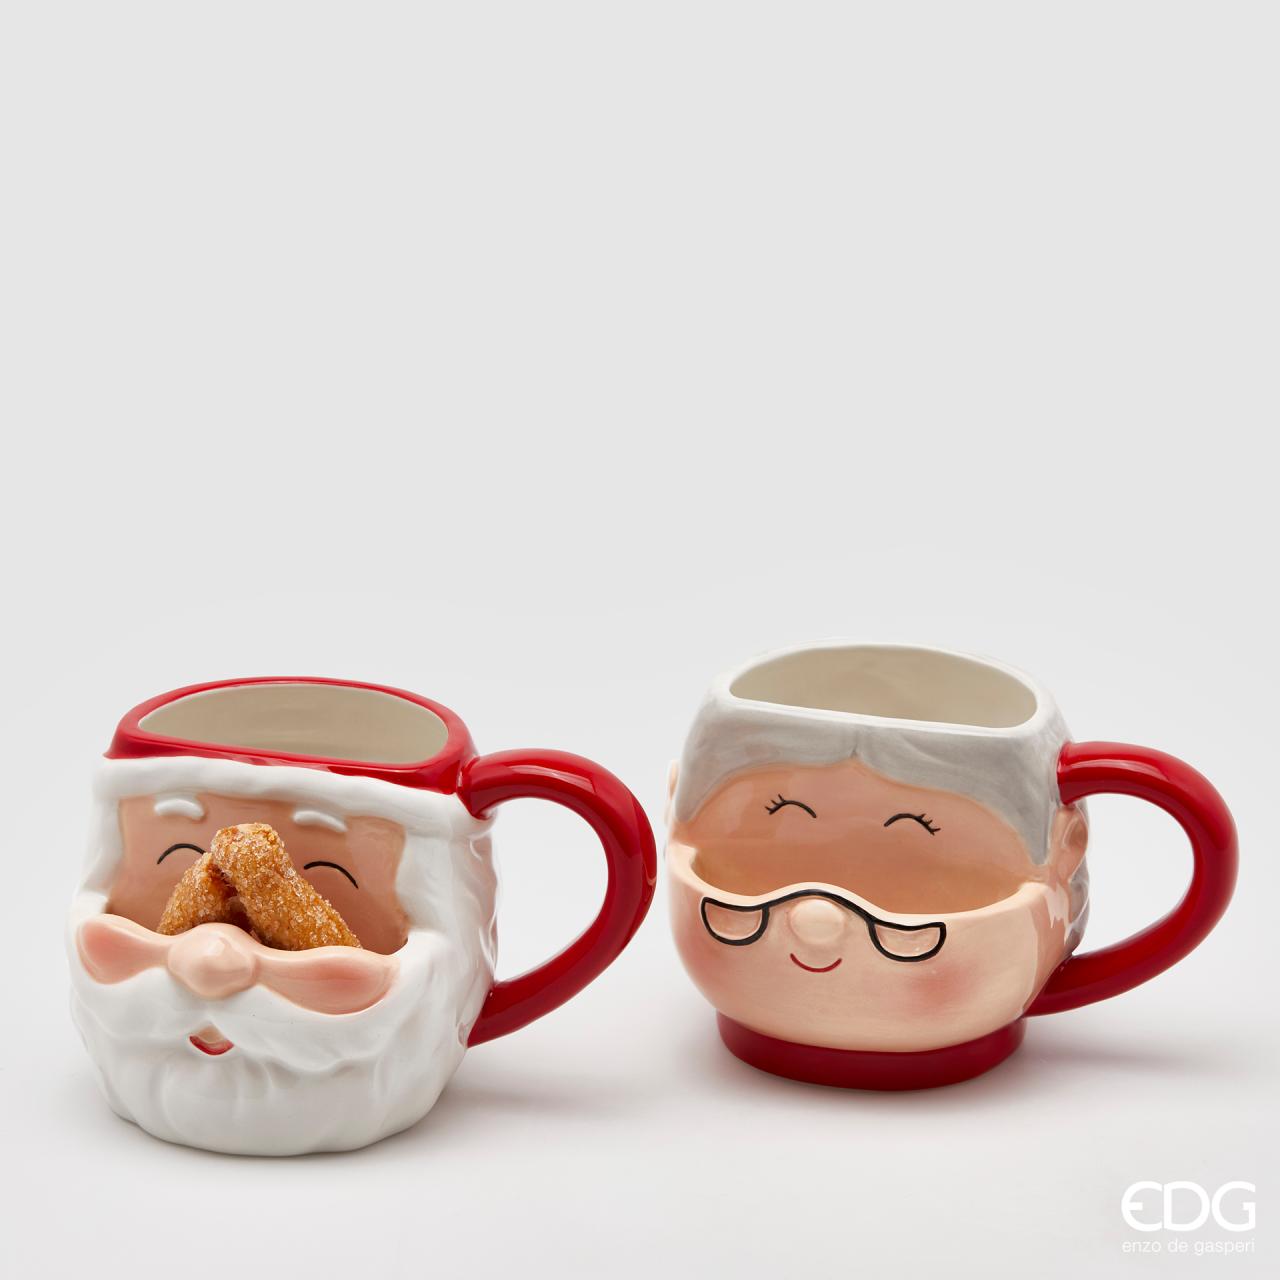 Mr & Mrs Claus Mug with Cookie Pocket - 2 Assortments